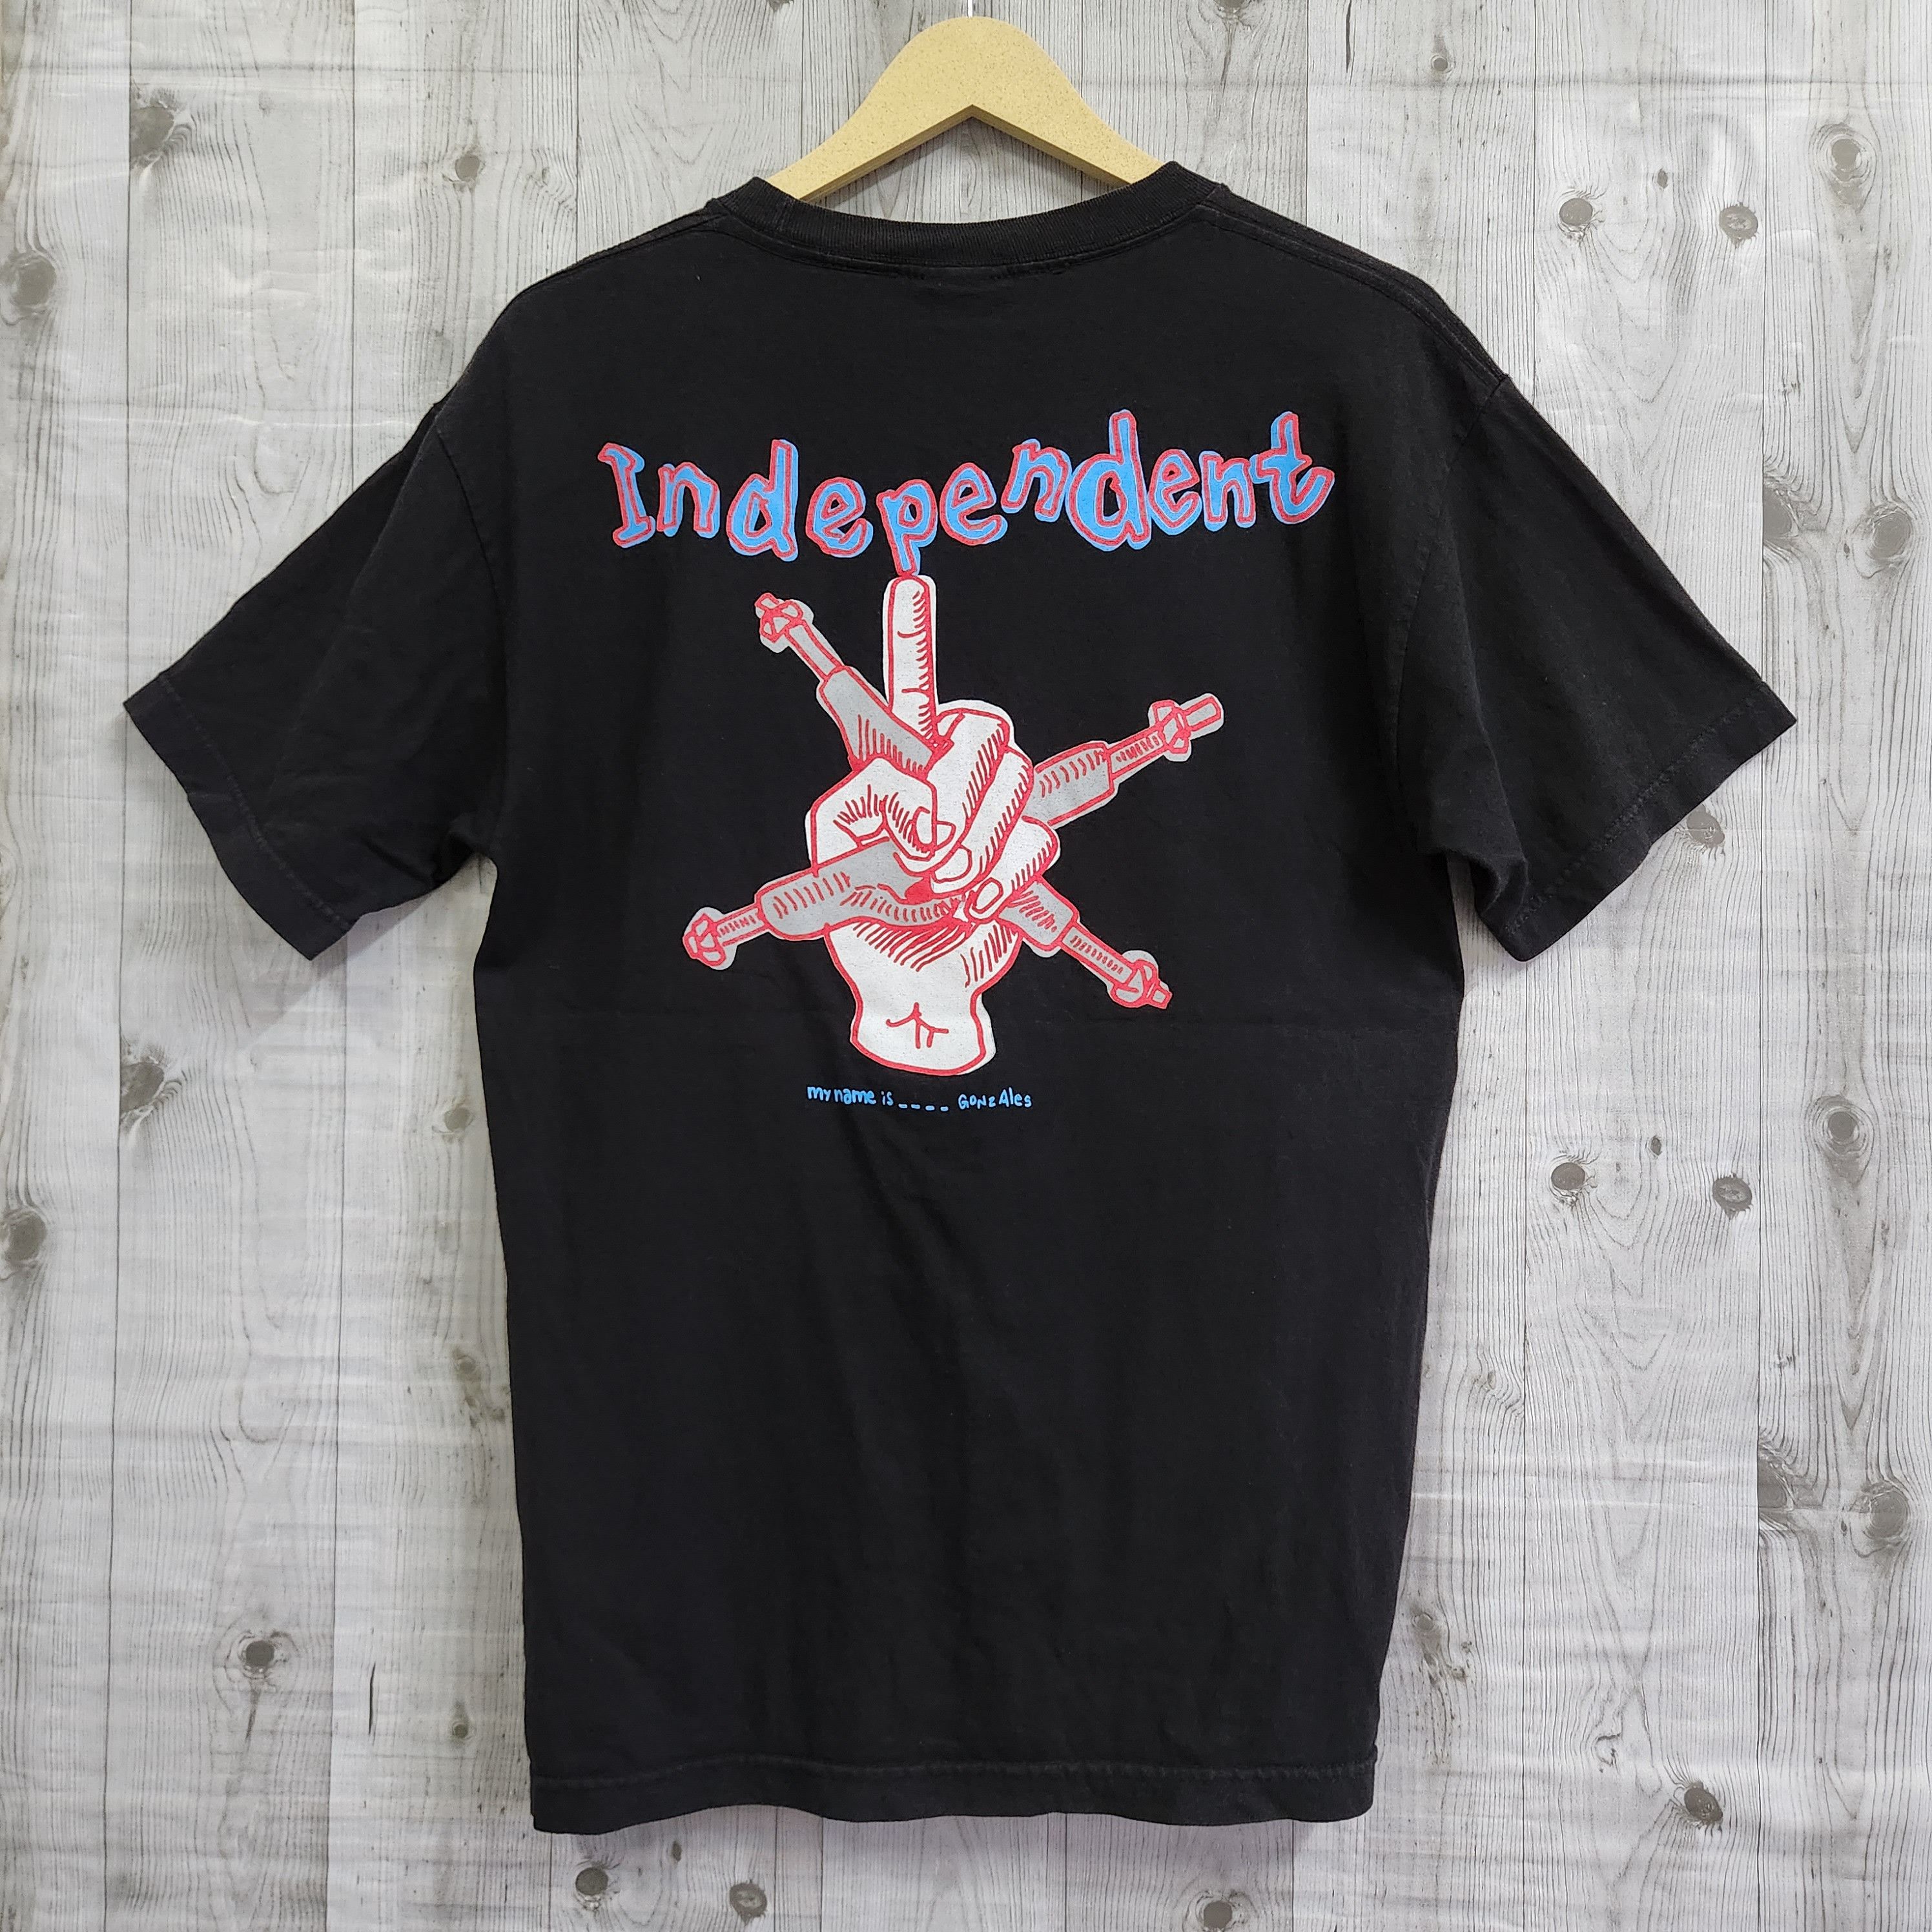 Independent Truck Co. - Independent X The Gonz Skategang Streetwear Tees - 1